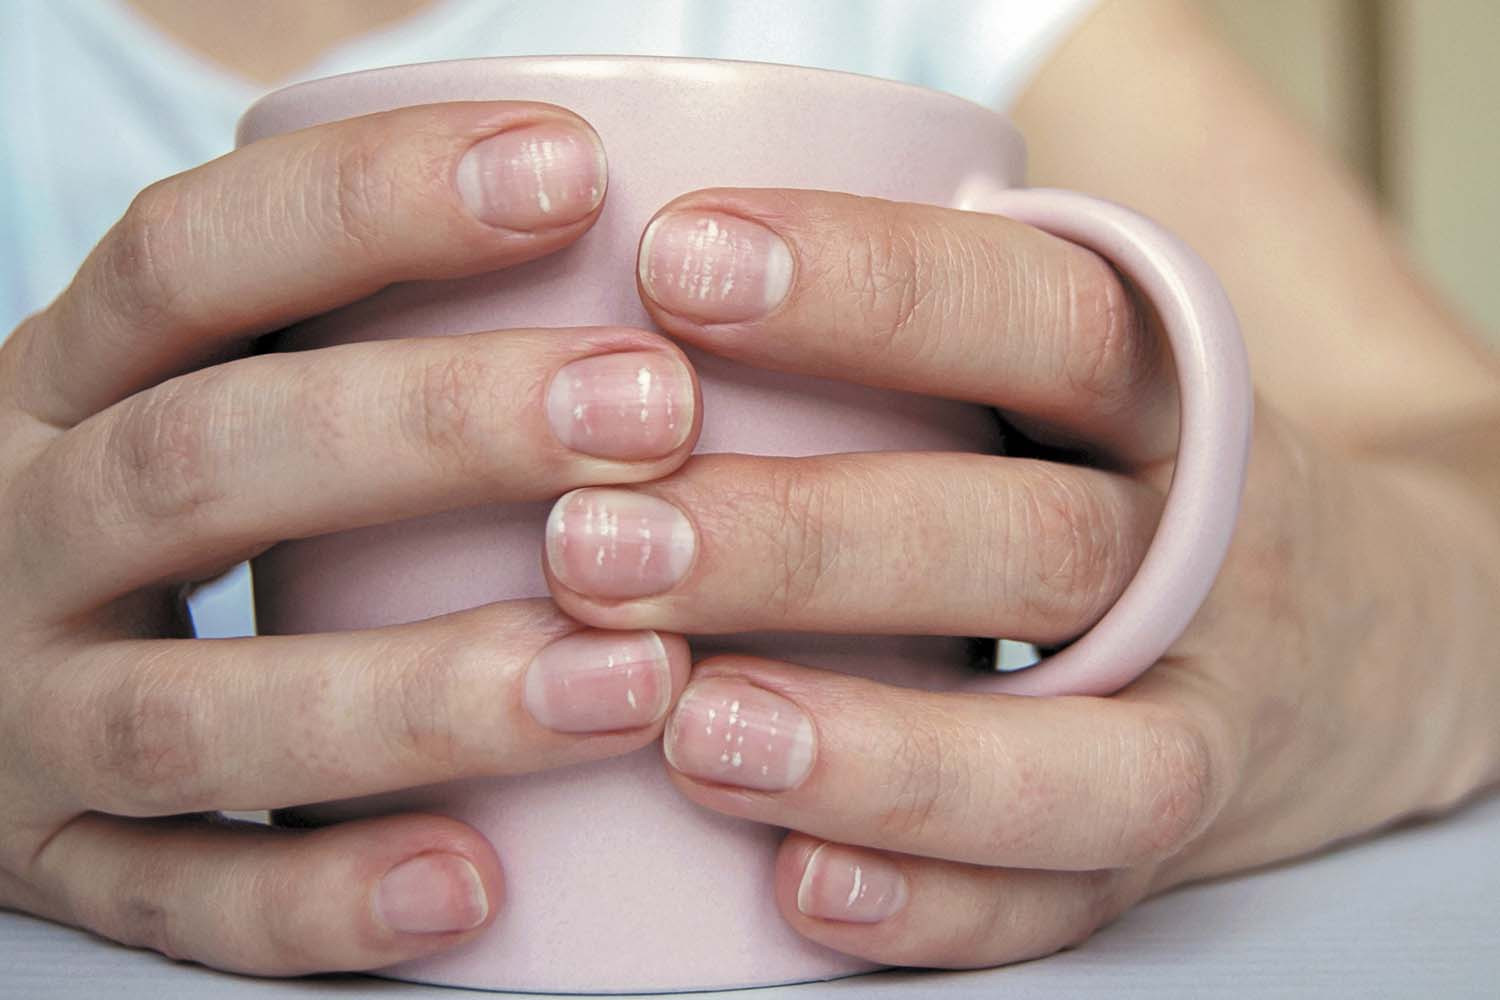 close-up photo of a woman's hands holding a mug; her fingernails have white spots